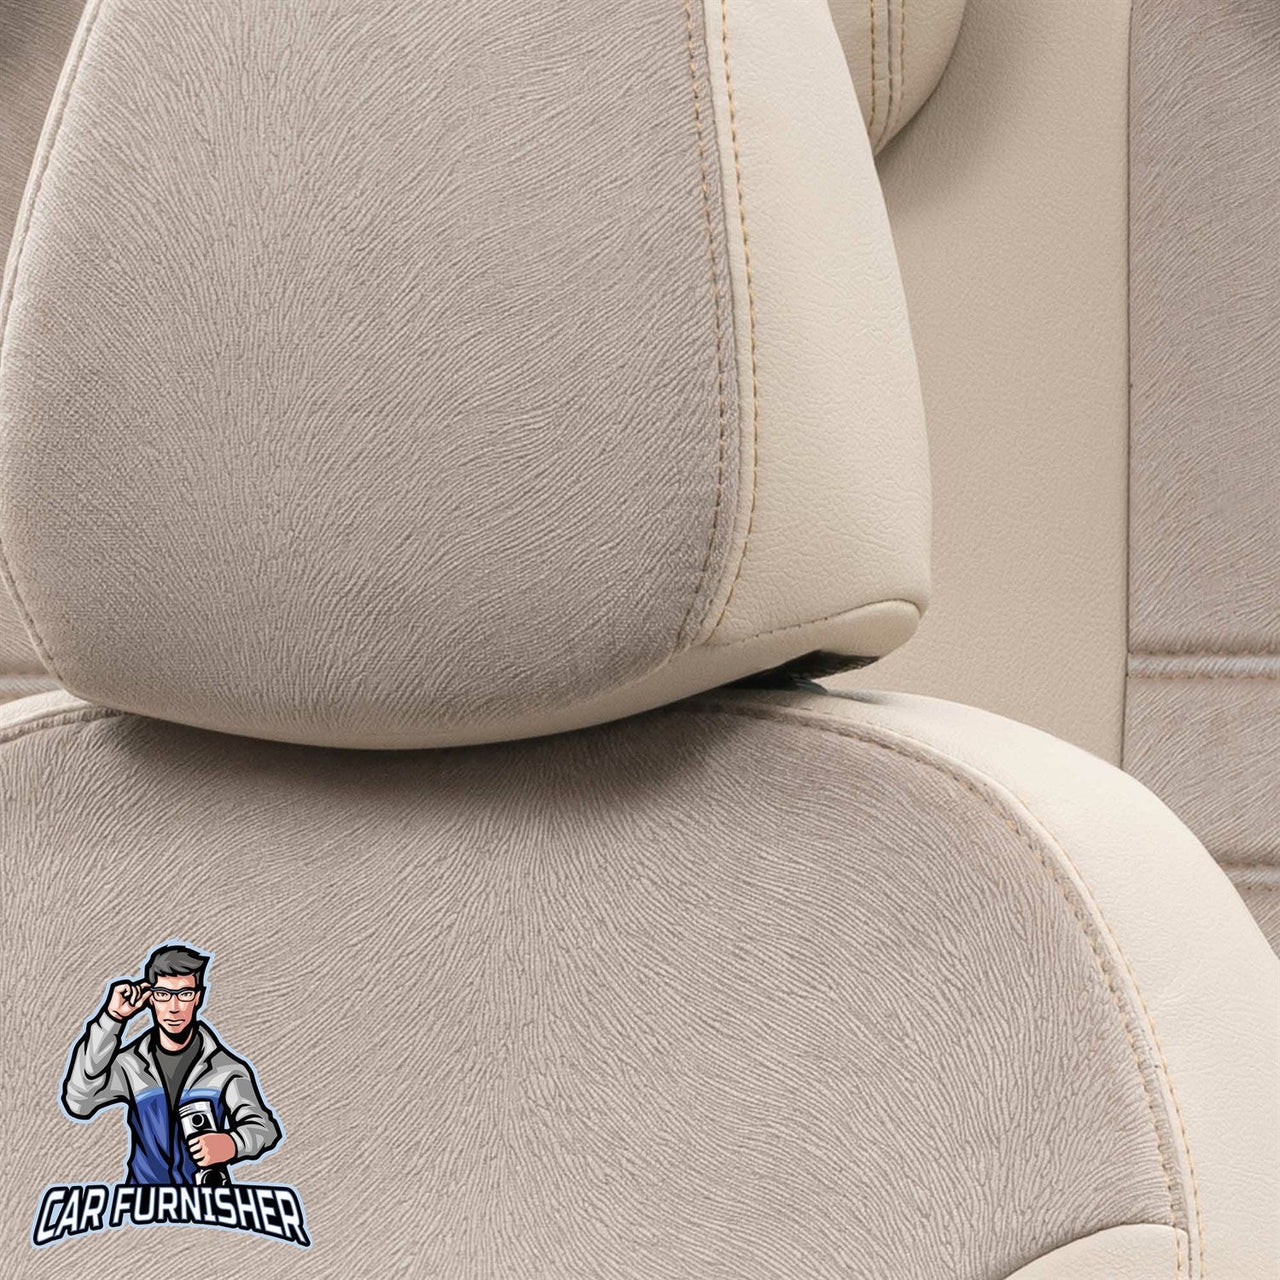 Volkswagen ID.4 Seat Cover London Foal Feather Design Beige Leather & Foal Feather